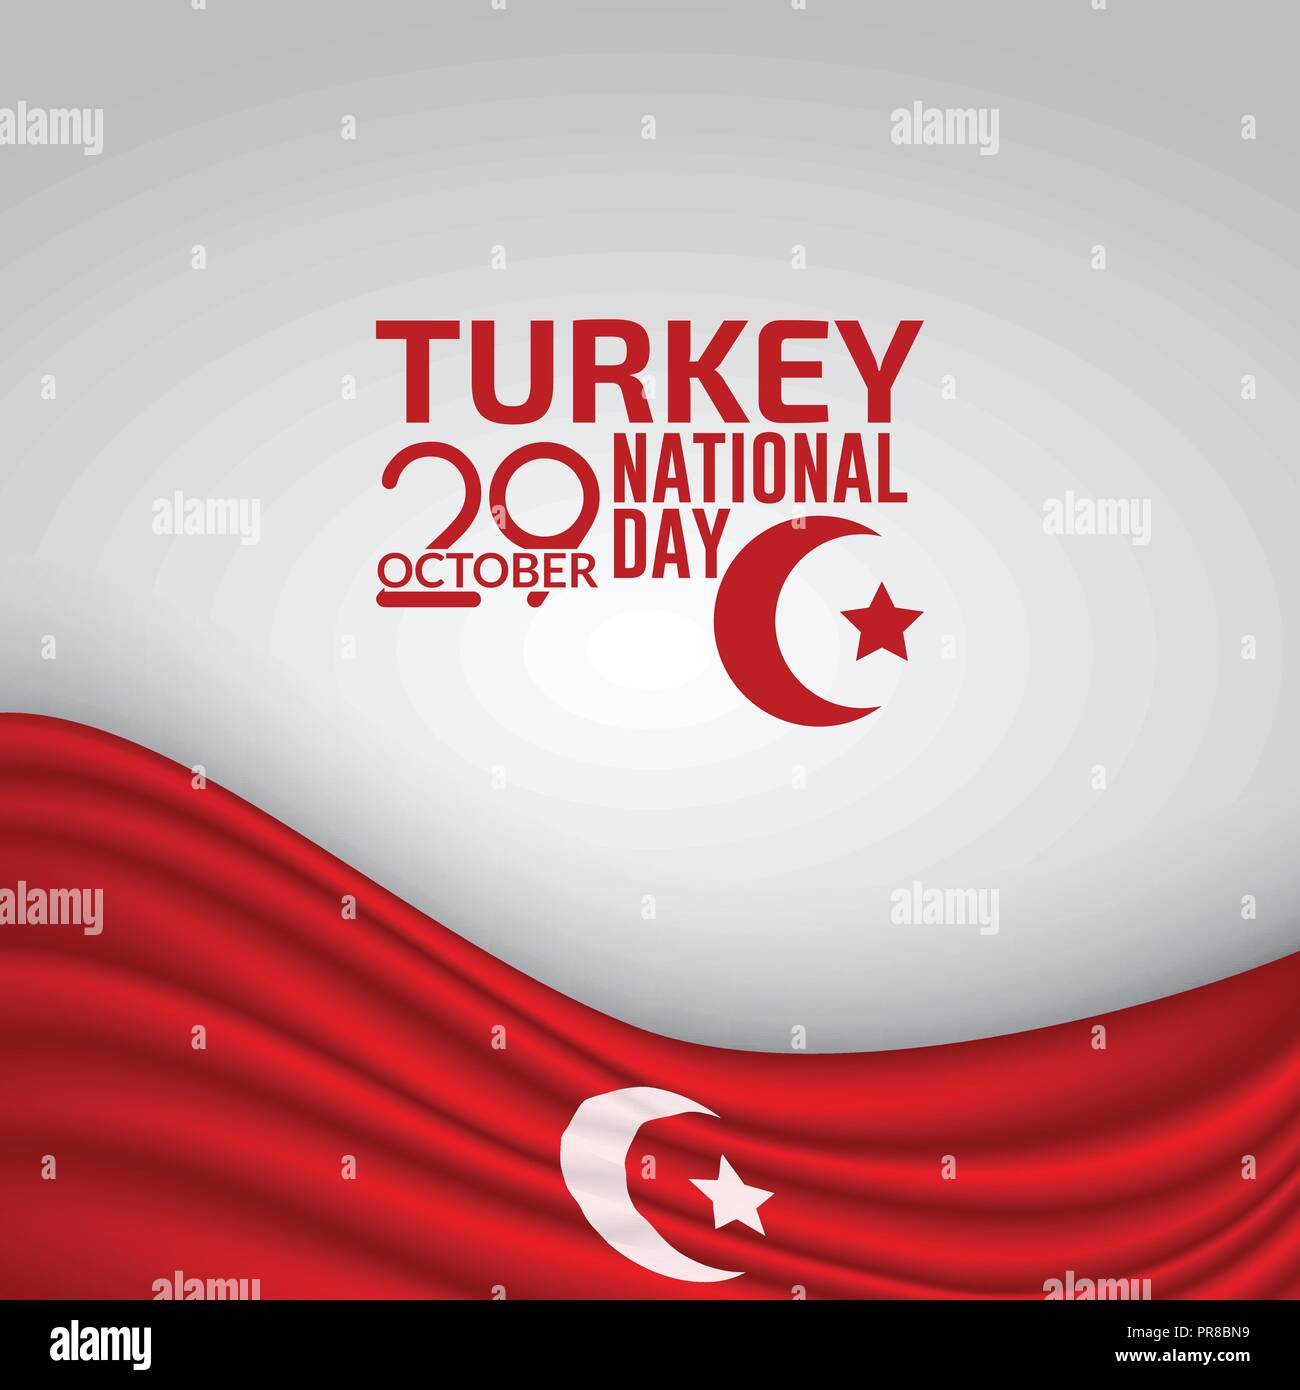 Turkey Independence Day Flag Vector Background Illustration Stock Vector